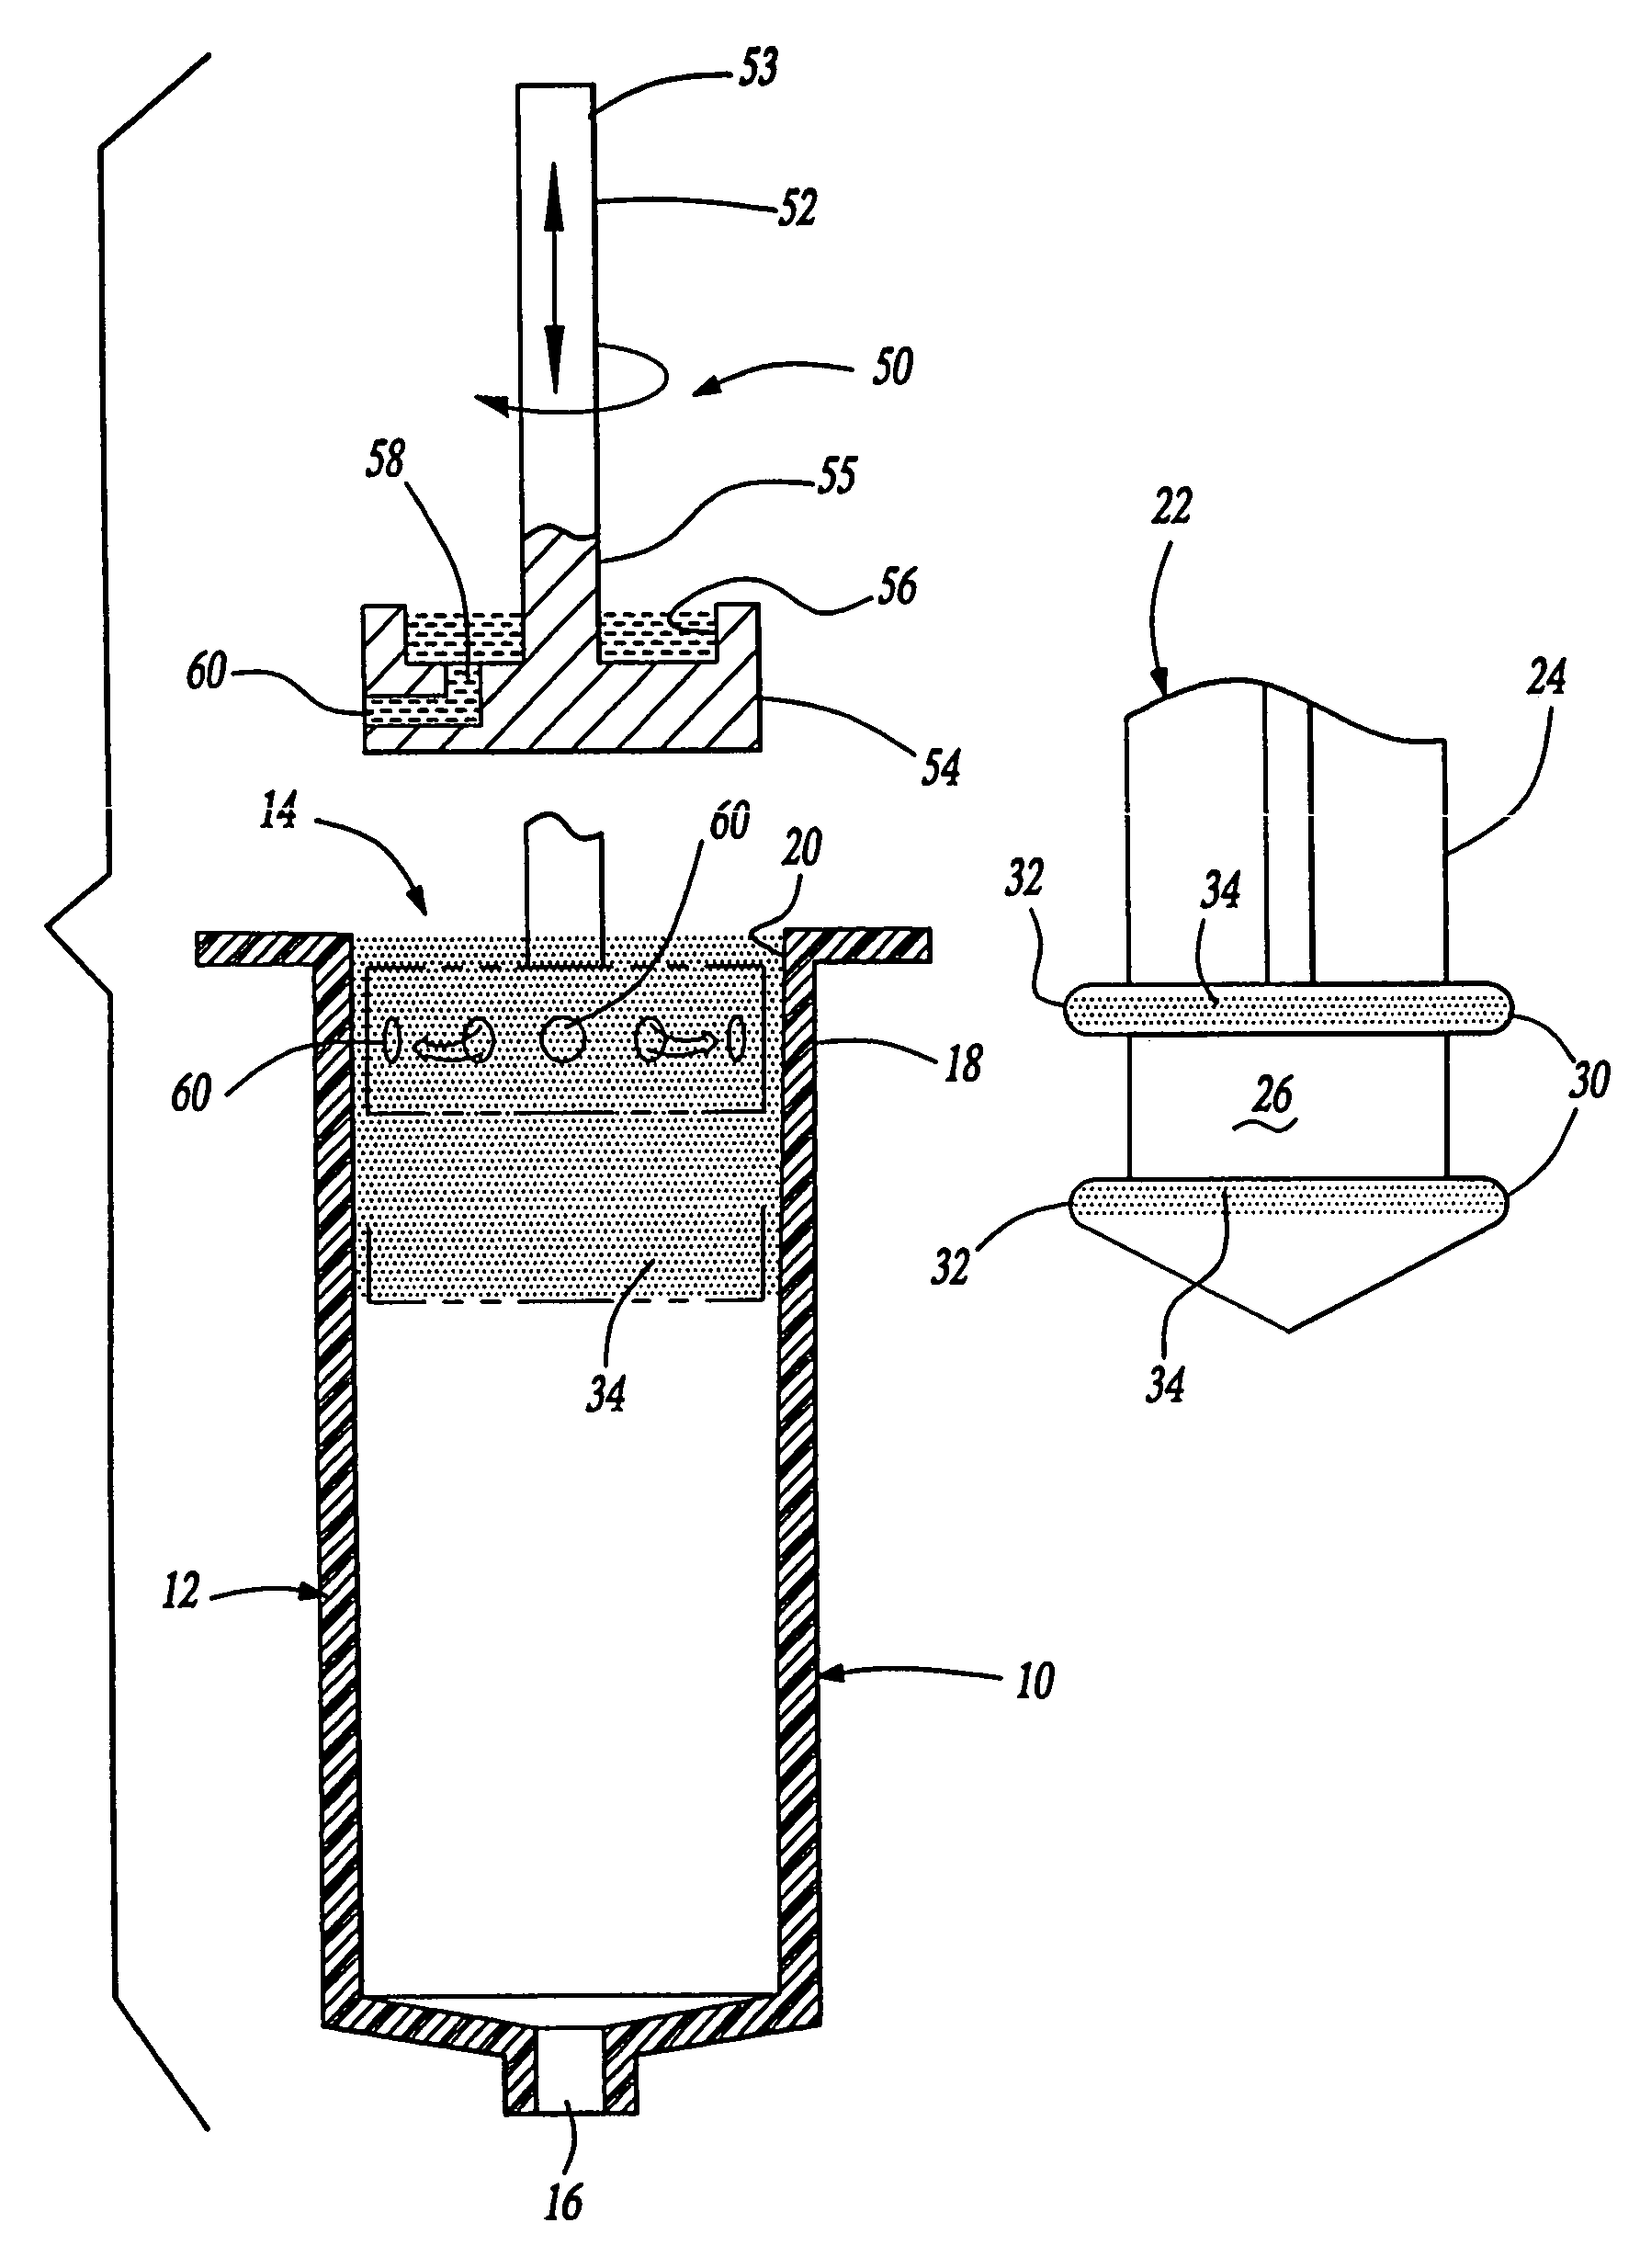 Localized lubrication of syringe barrels and stoppers